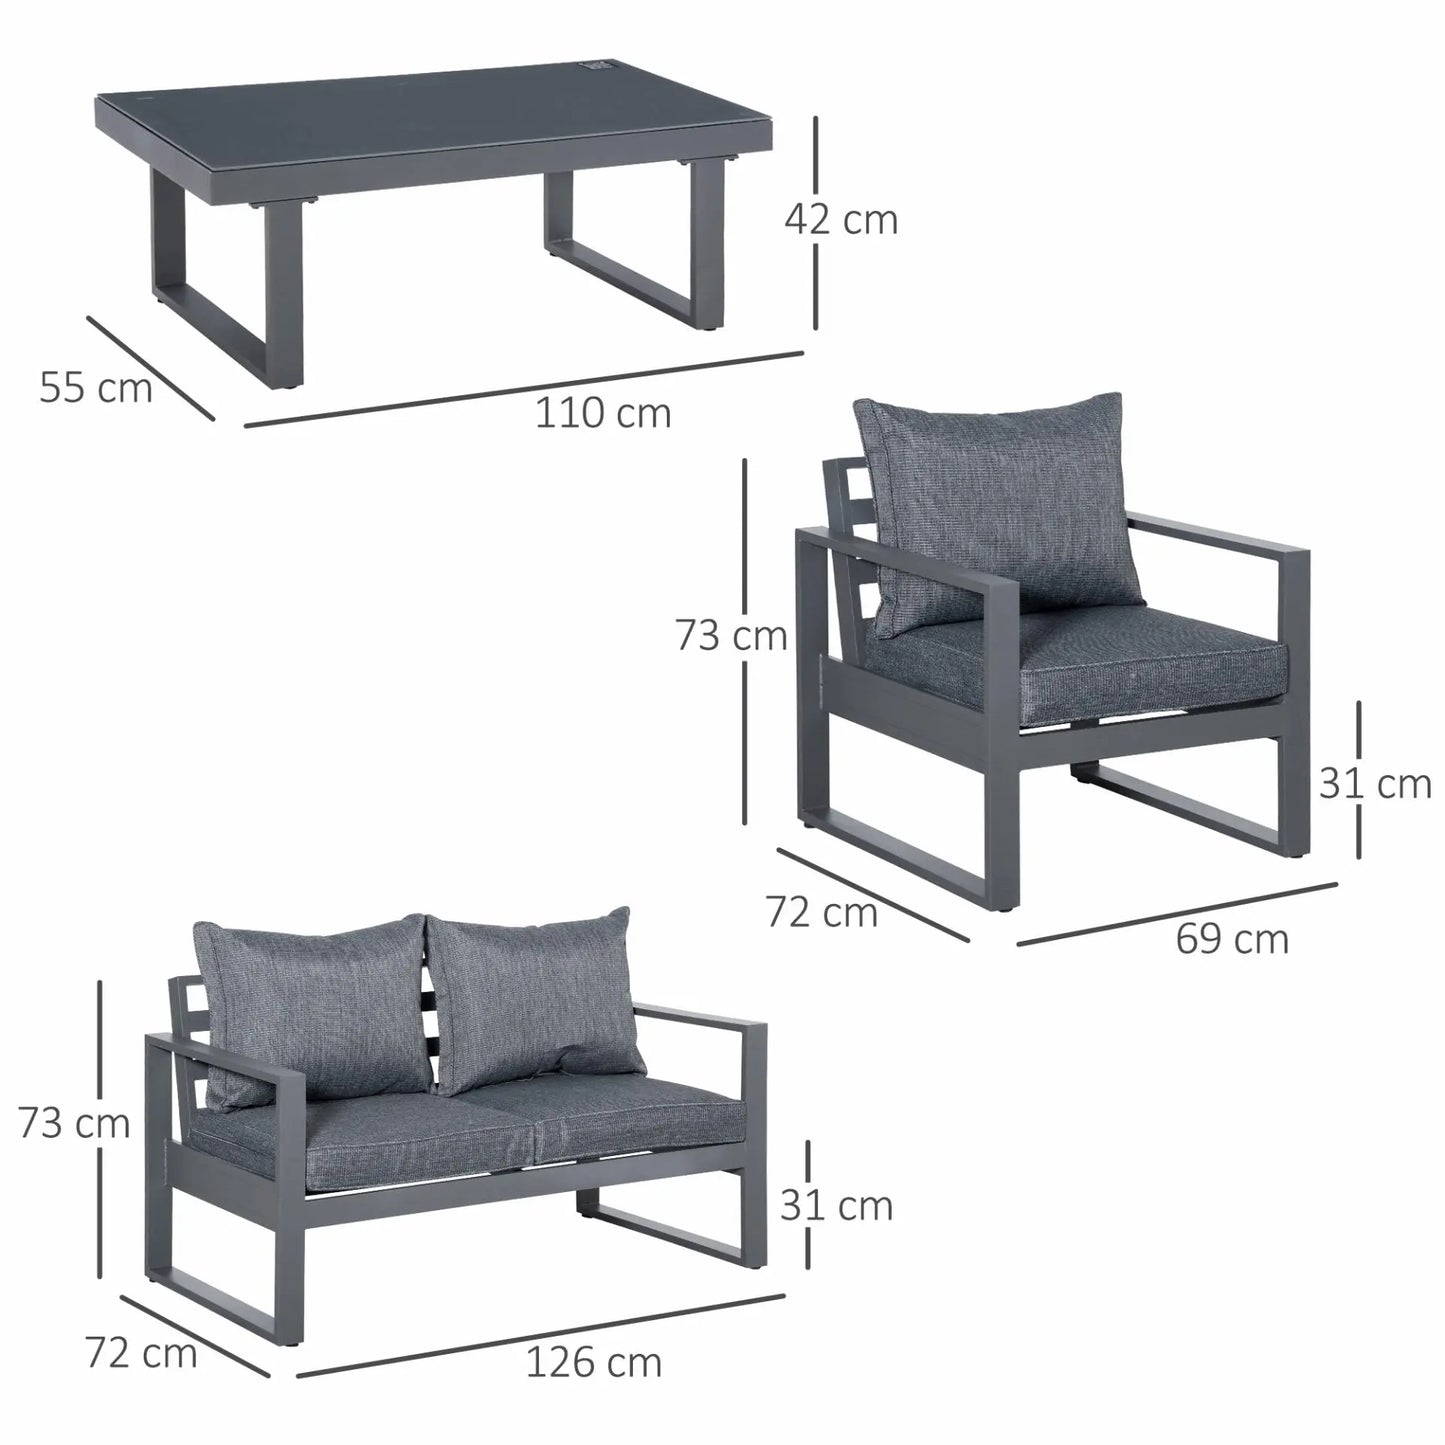 4 Piece Aluminium Garden Sofa Set with Coffee Table, Outdoor Furniture Set with Padded Cushions & Olefin Cover, Dark Grey - Londecor